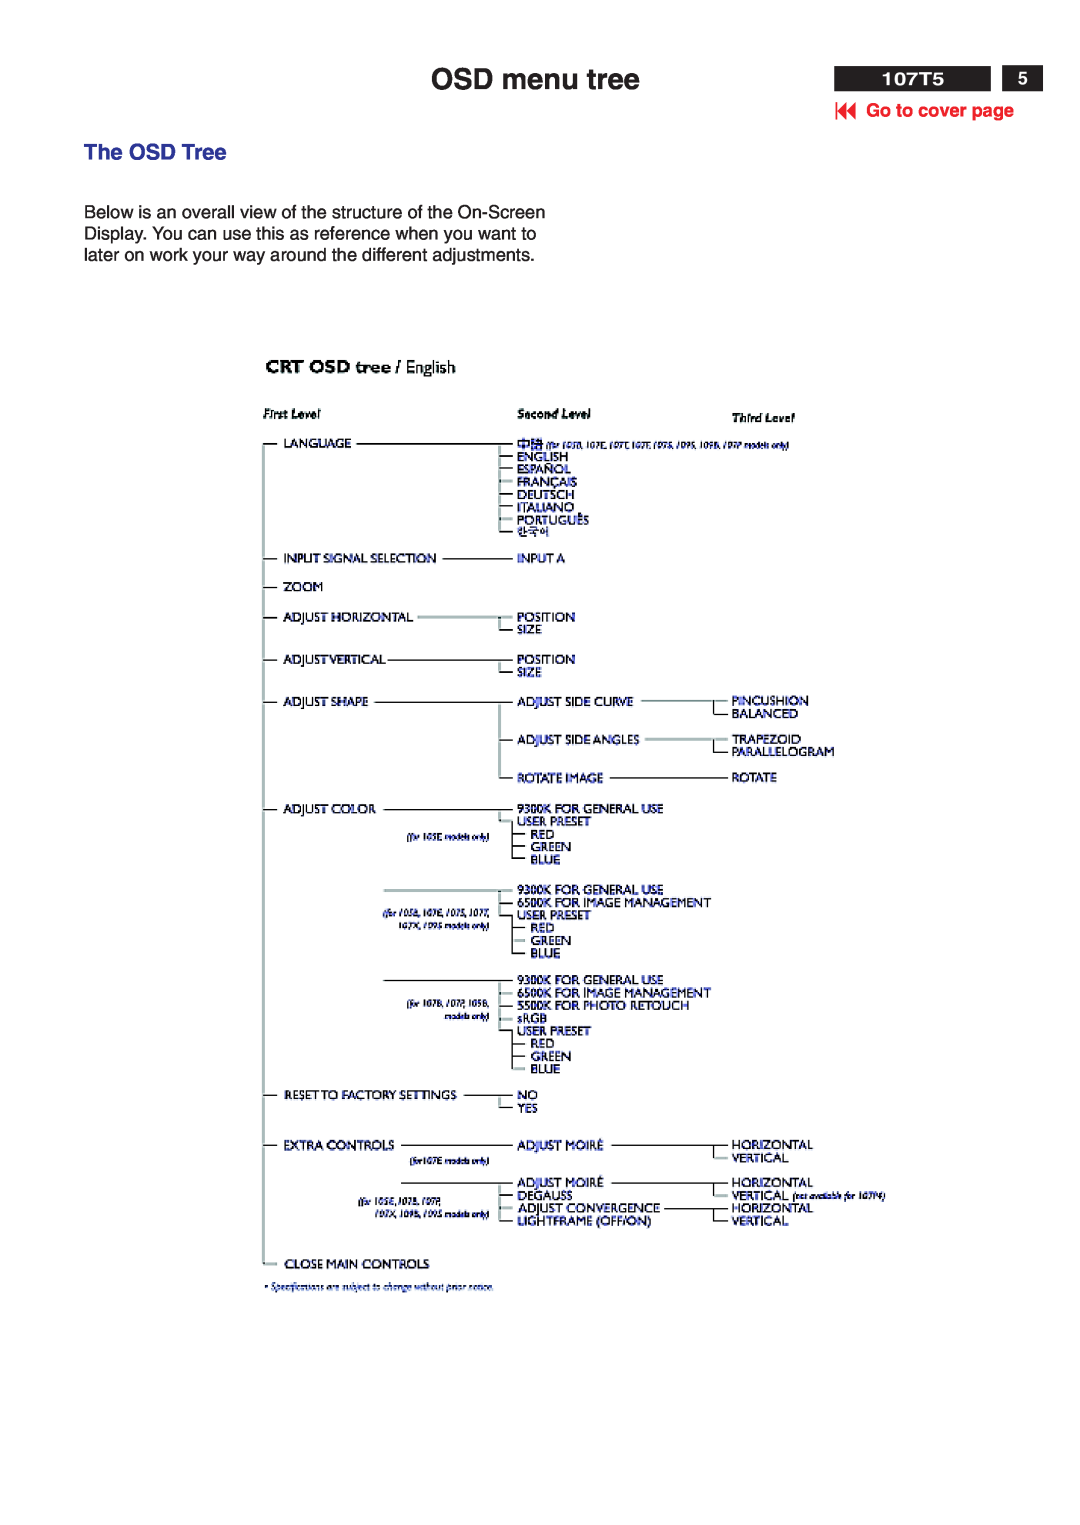 Philips V30 manual OSD menu tree, The OSD Tree, 107T5, Go to cover page 